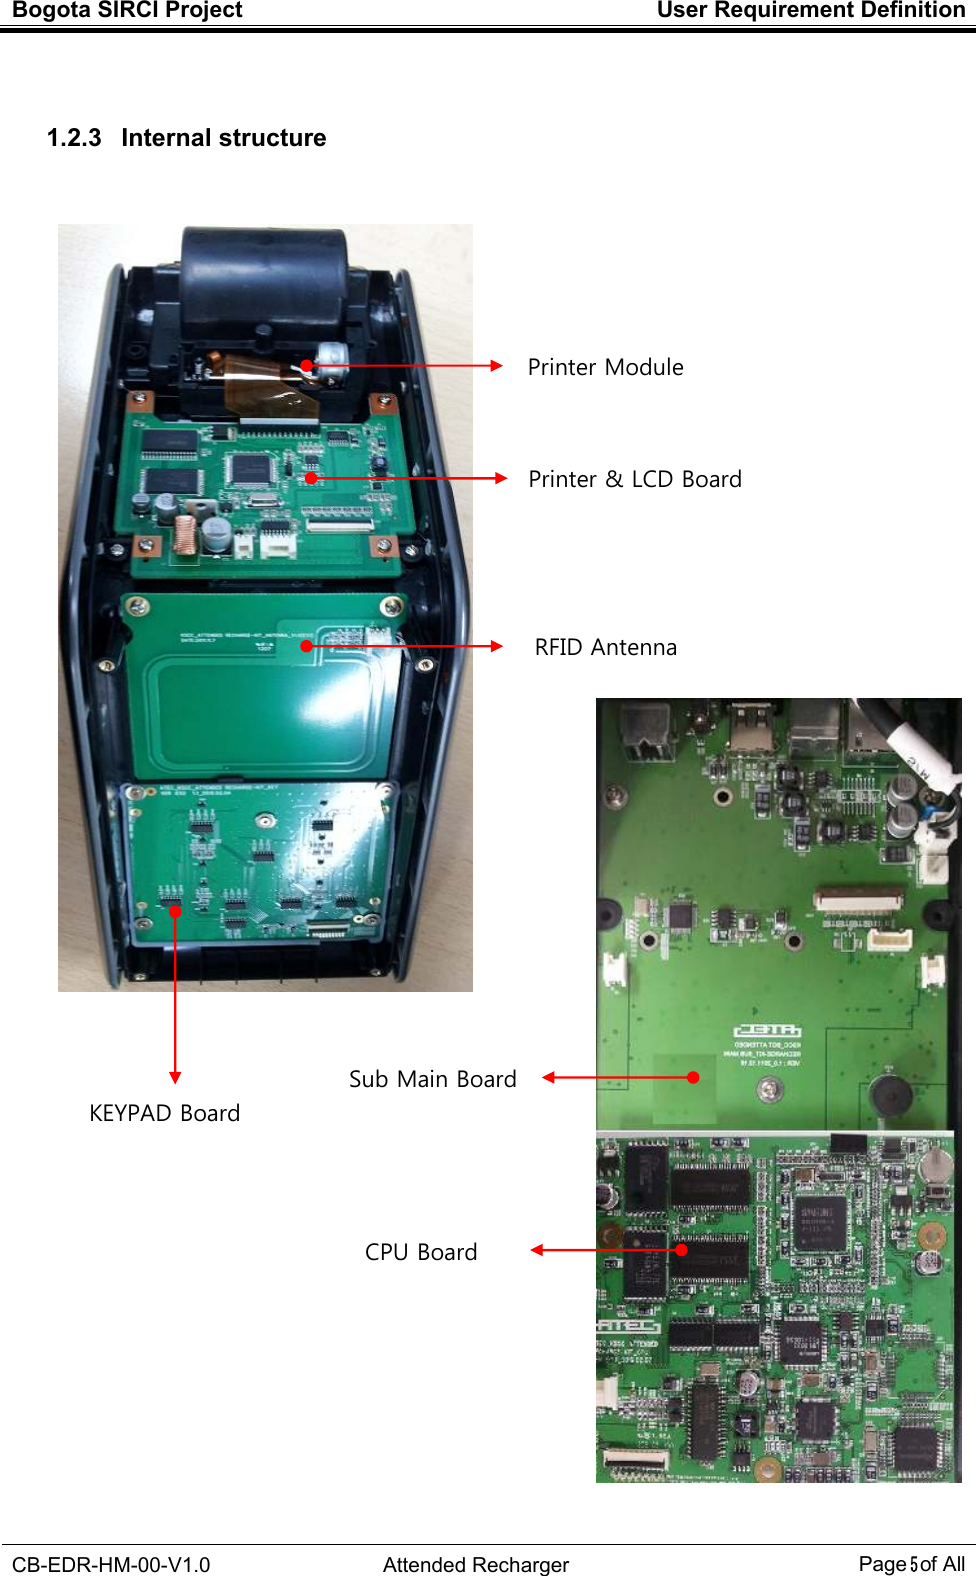 Bogota SIRCI Project  User Requirement Definition  CB-EDR-HM-00-V1.0  Attended Recharger Page５ of All   1.2.3   Internal structure                    Printer Module    Printer &amp; LCD Board    RFID Antenna    KEYPAD Board             Sub Main Board             CPU Board 